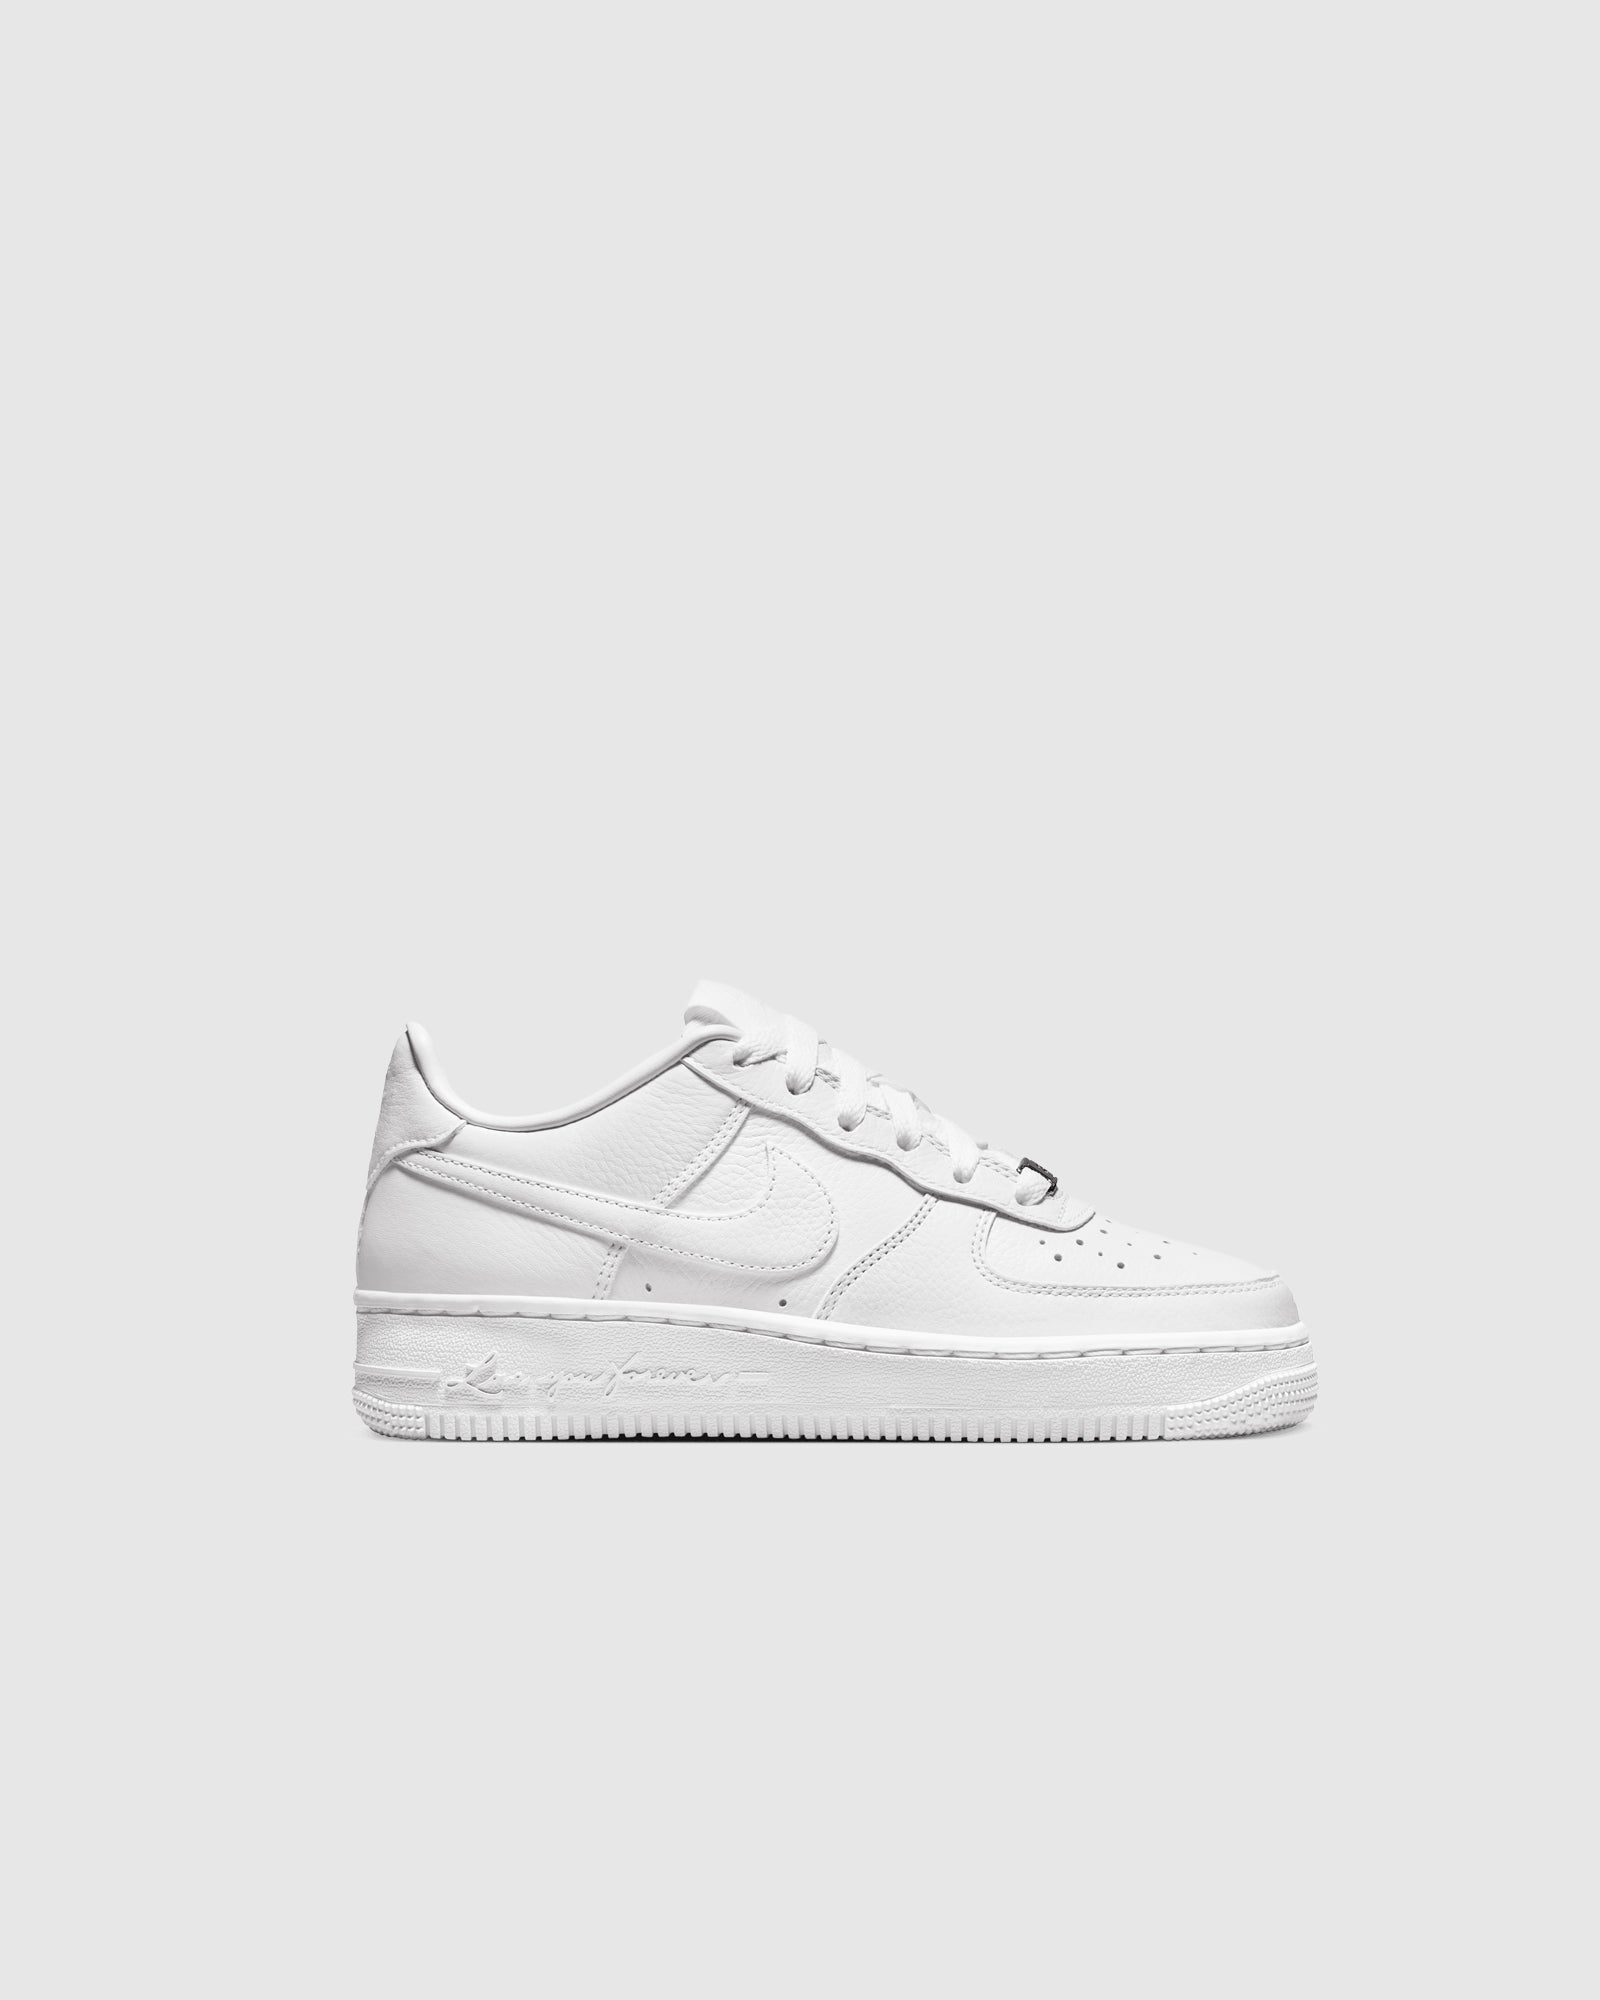 NOCTA AIR FORCE 1 LOW "CERTIFIED LOVER BOY" GS